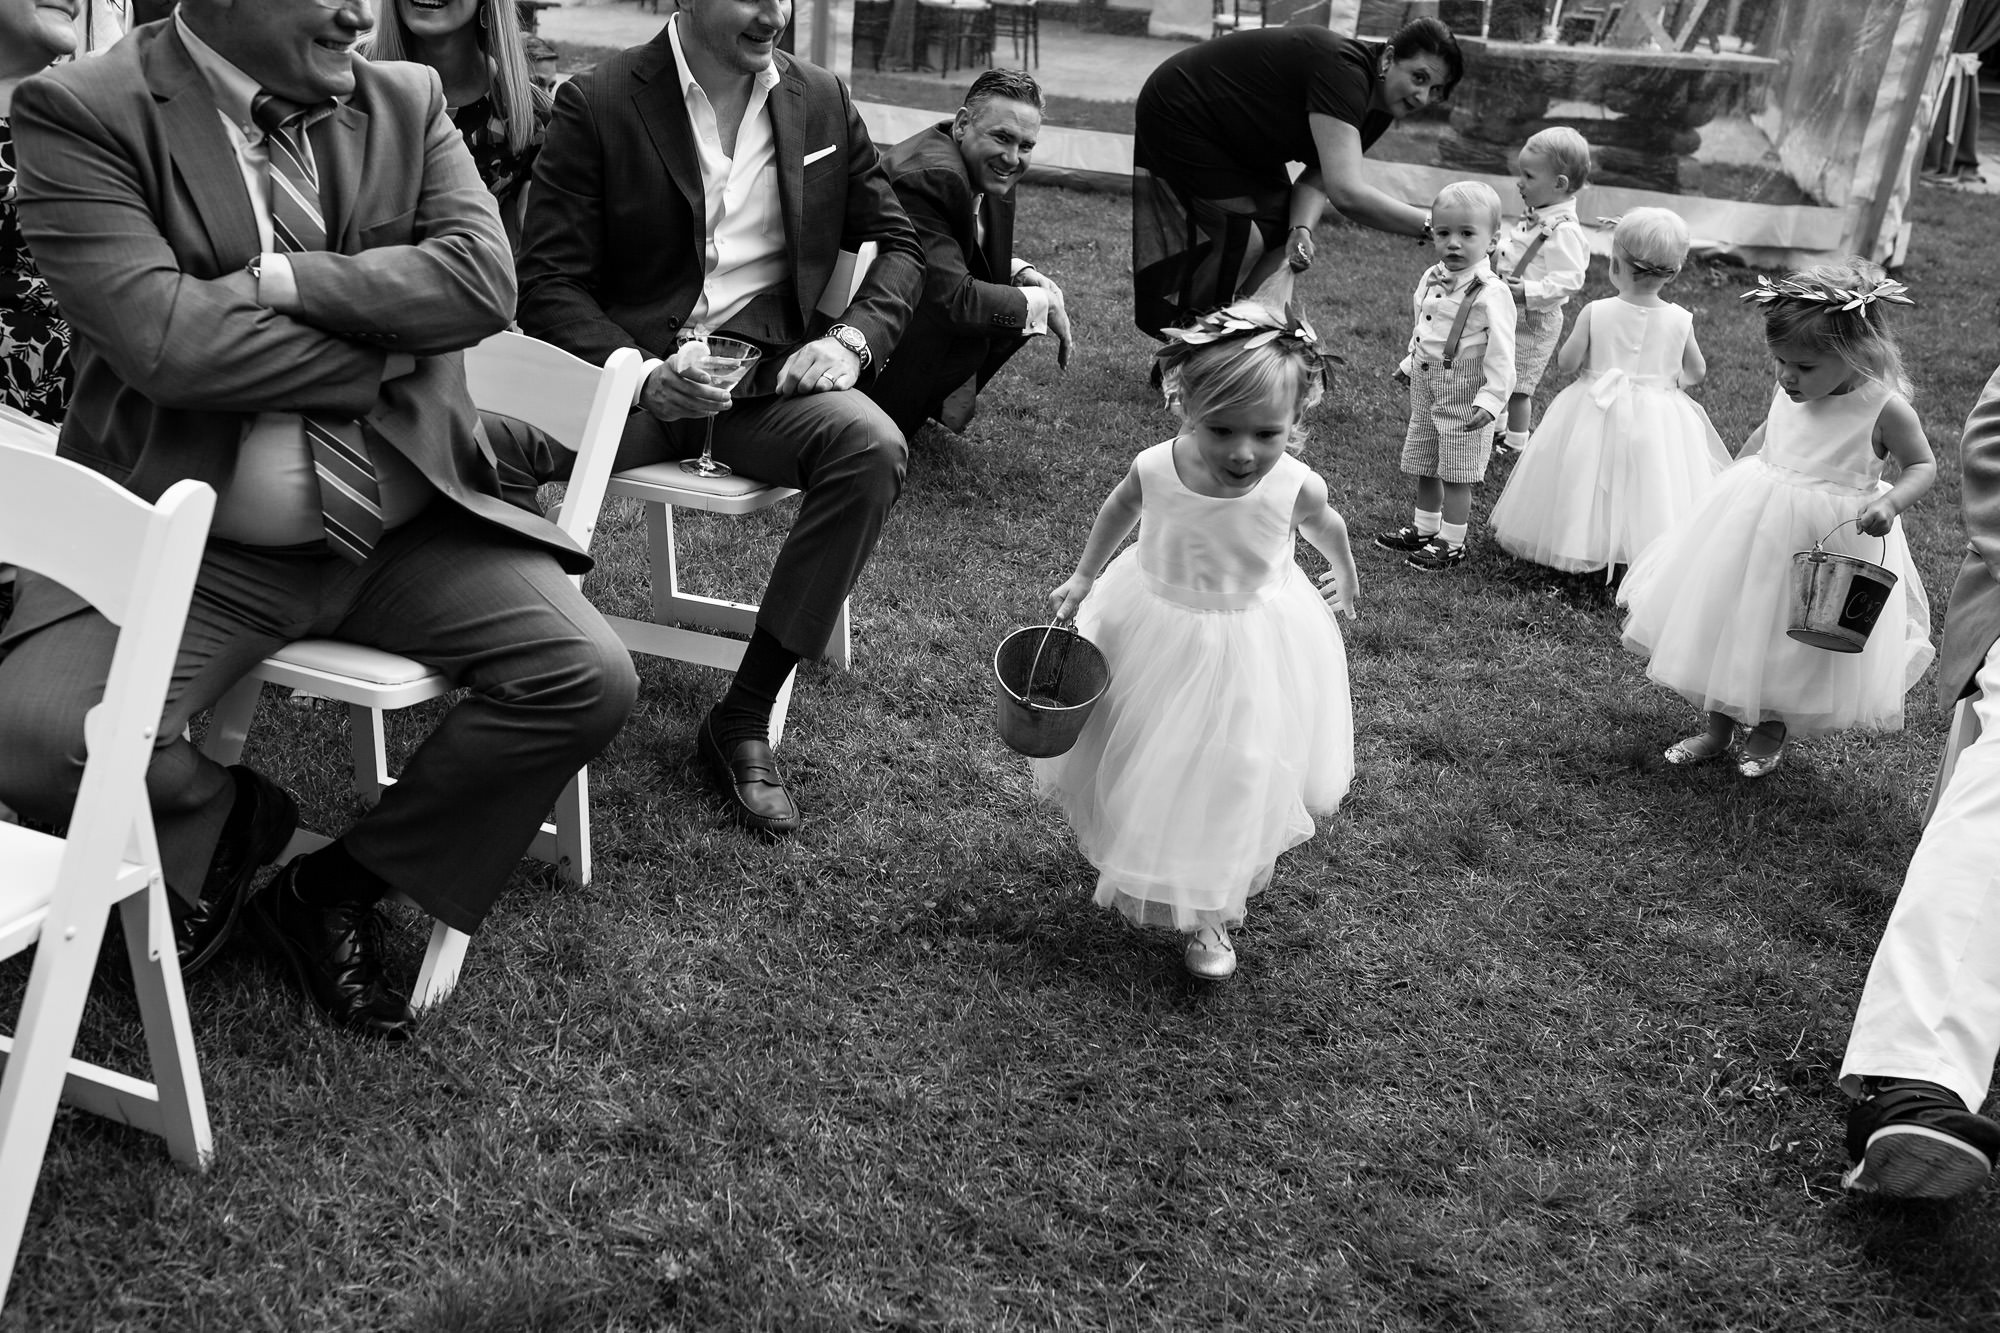 The flower girls/ring bearers struggle at a wedding ceremony in Kennebunkport, Maine